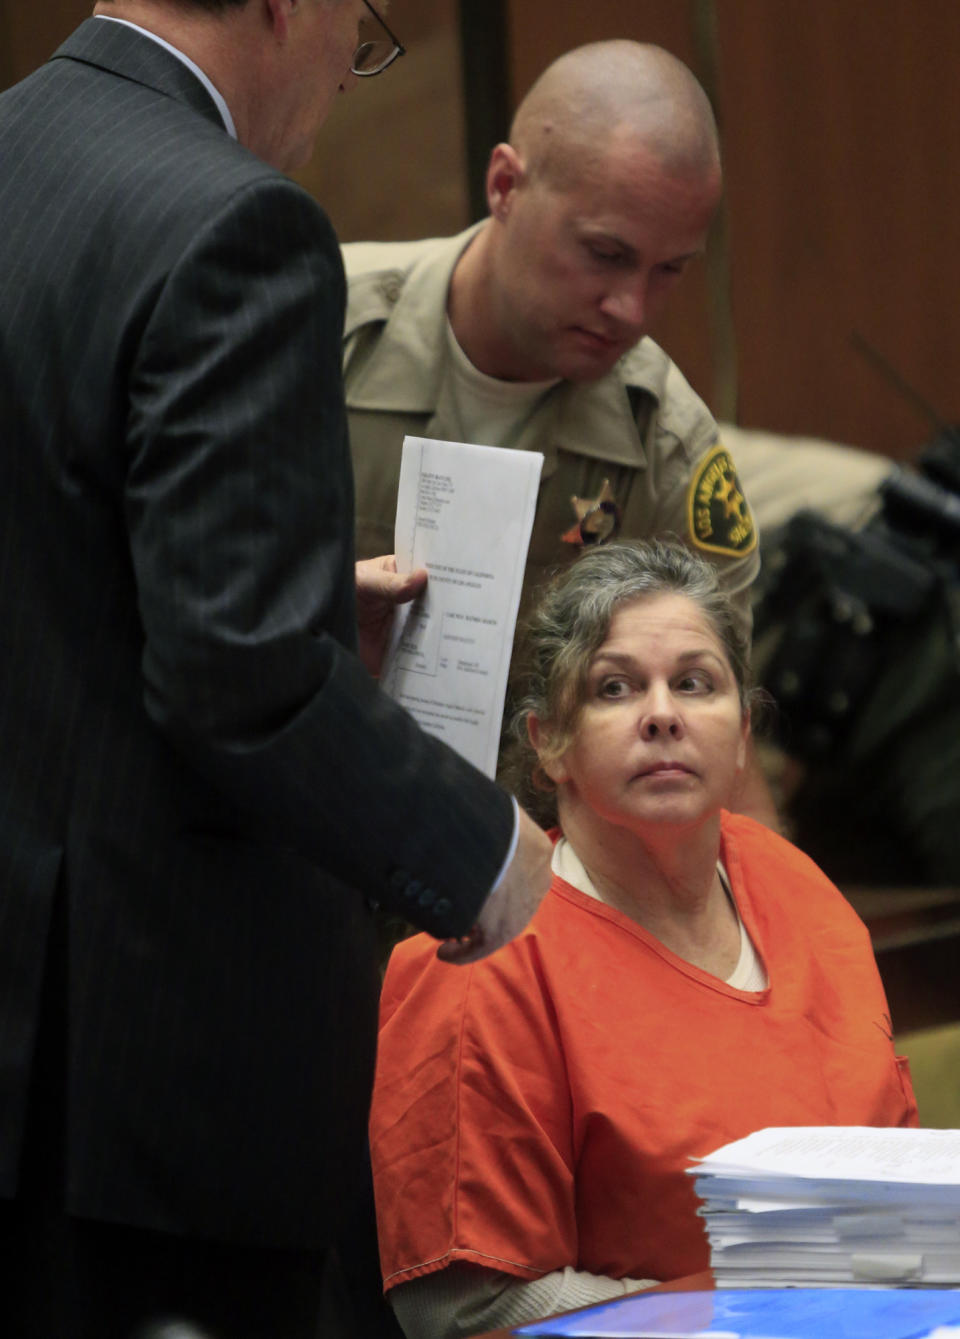 Former Bell assistant city administrator Angela Spaccia appears in court on Thursday, April 10, 2014, in Los Angeles. Spaccia was sentenced Thursday to nearly 12 years in prison for bilking the Bell's city coffers of thousands of dollars through an exorbitant salary and a pair of six-figure loans of taxpayer money. (AP Photo/Los Angeles Times, Mark Boster, Pool)